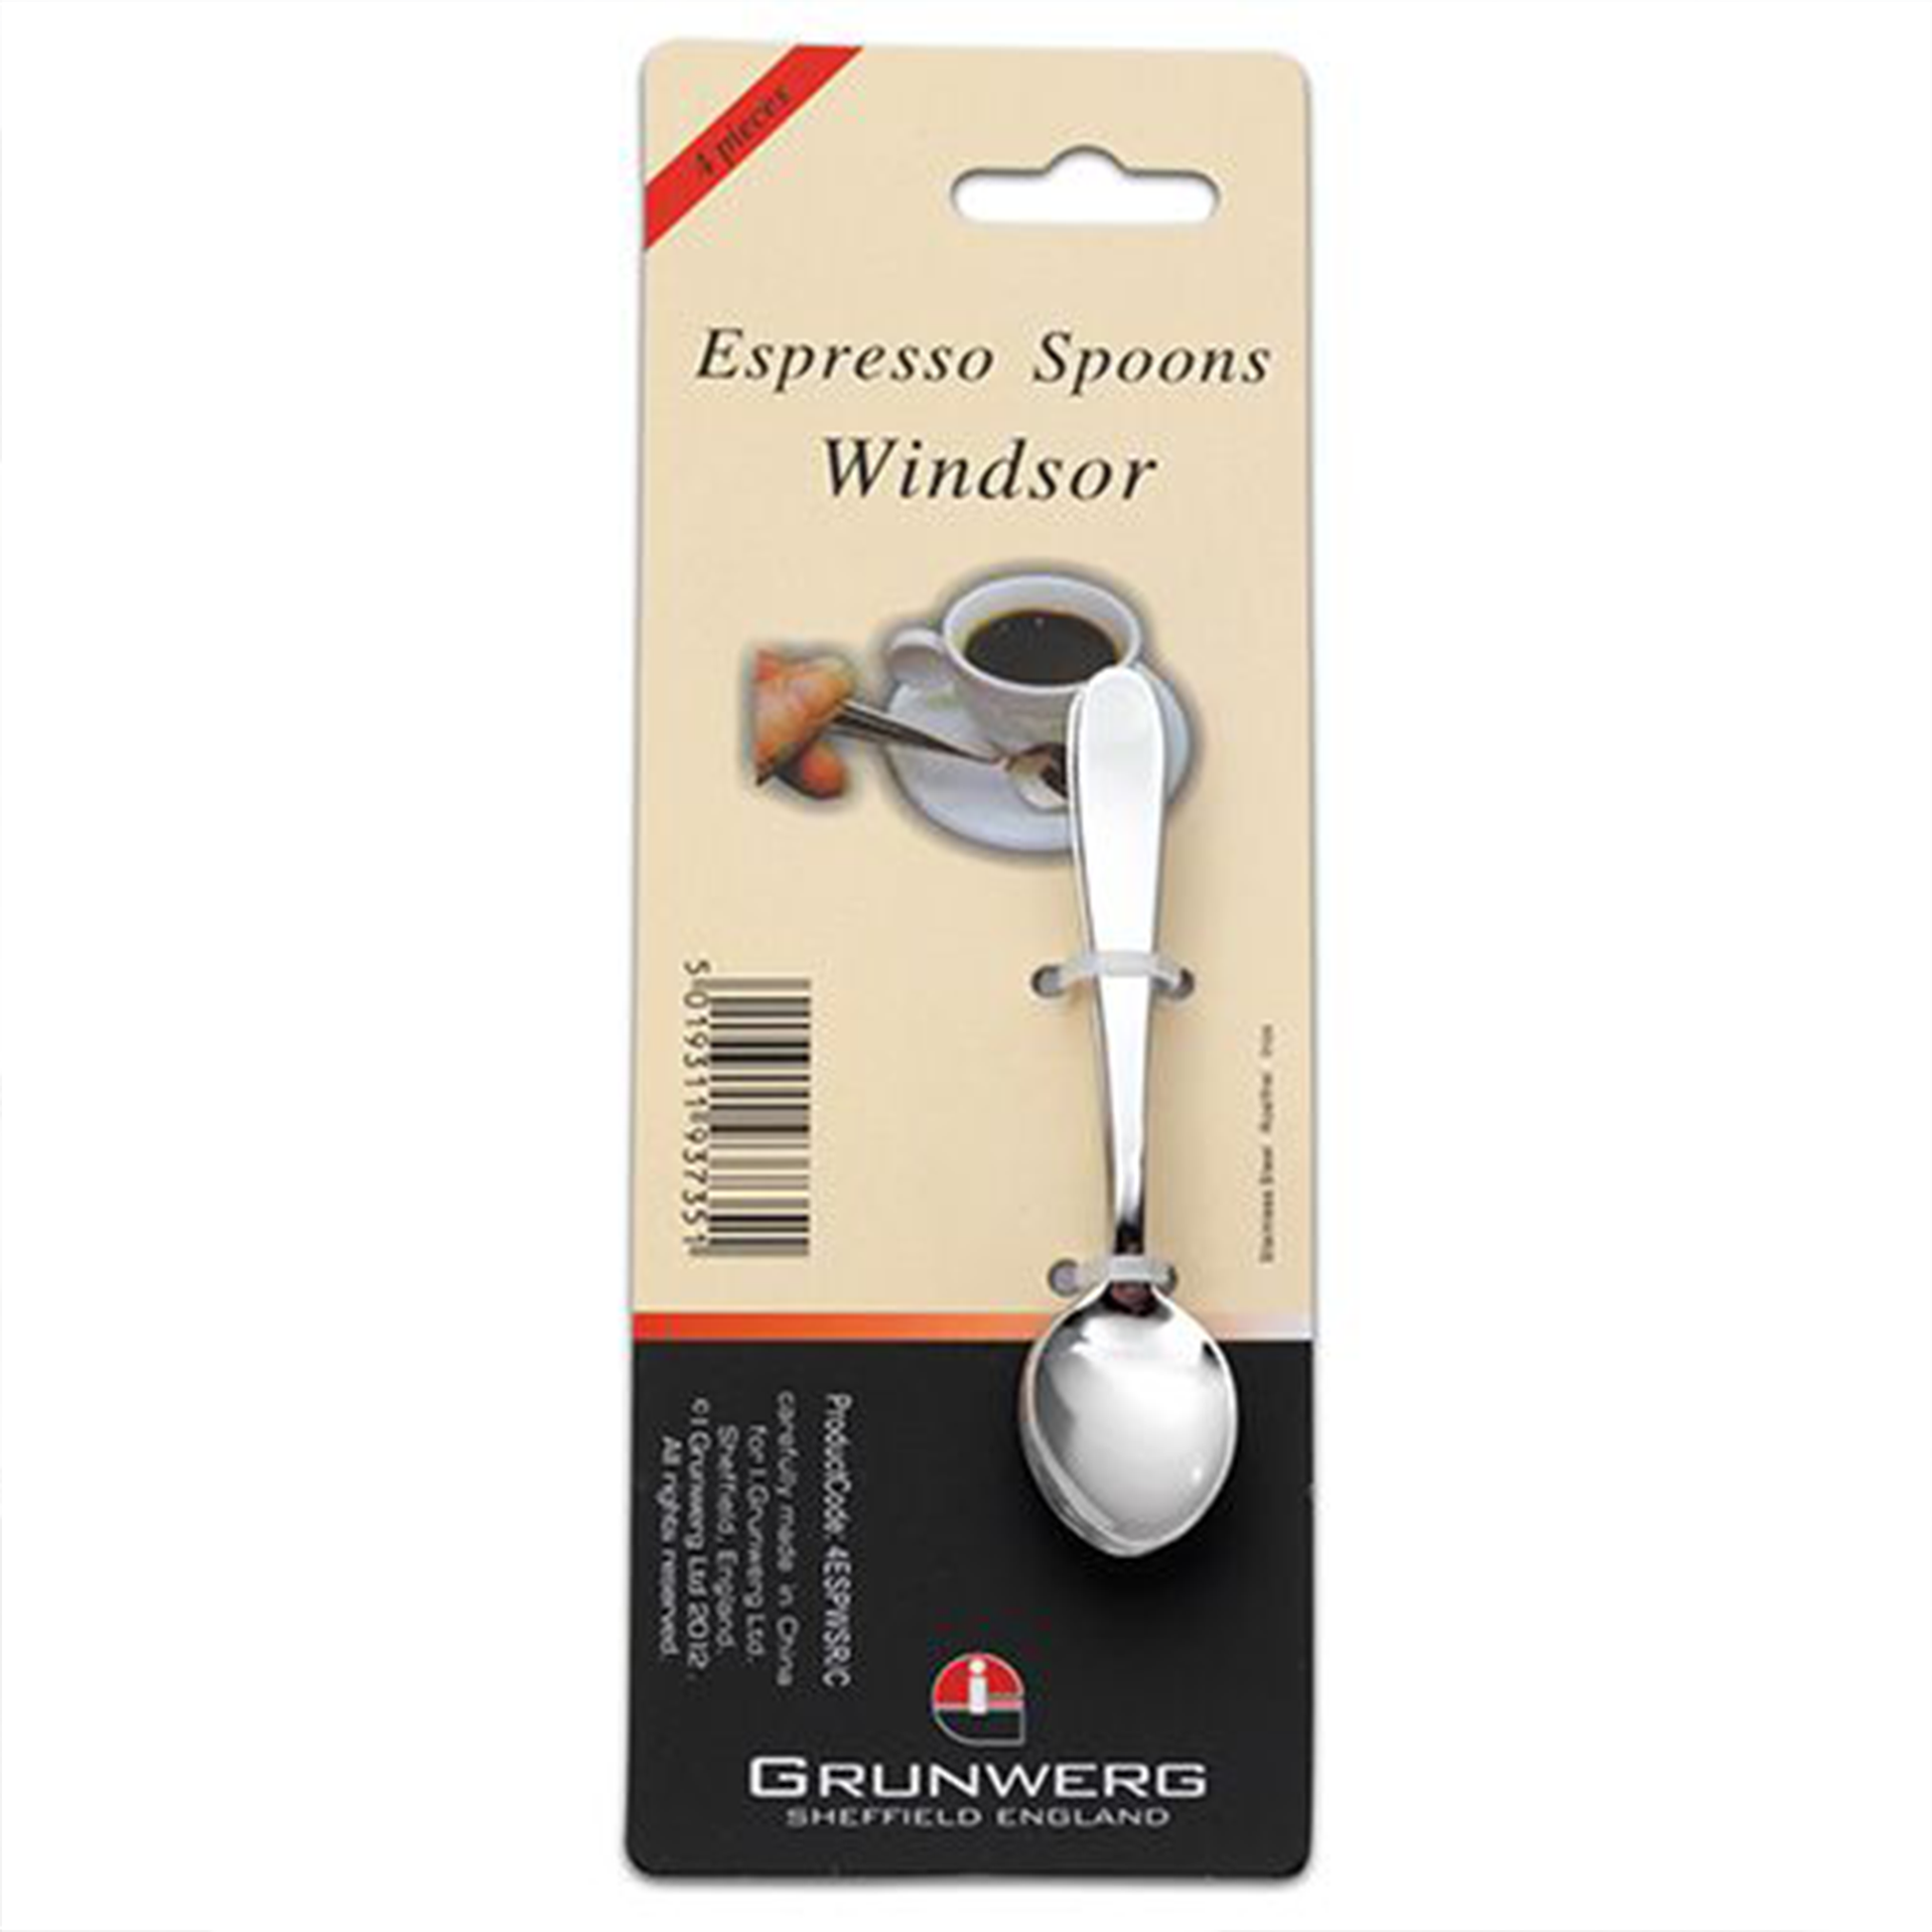 The espresso spoons on their branded card